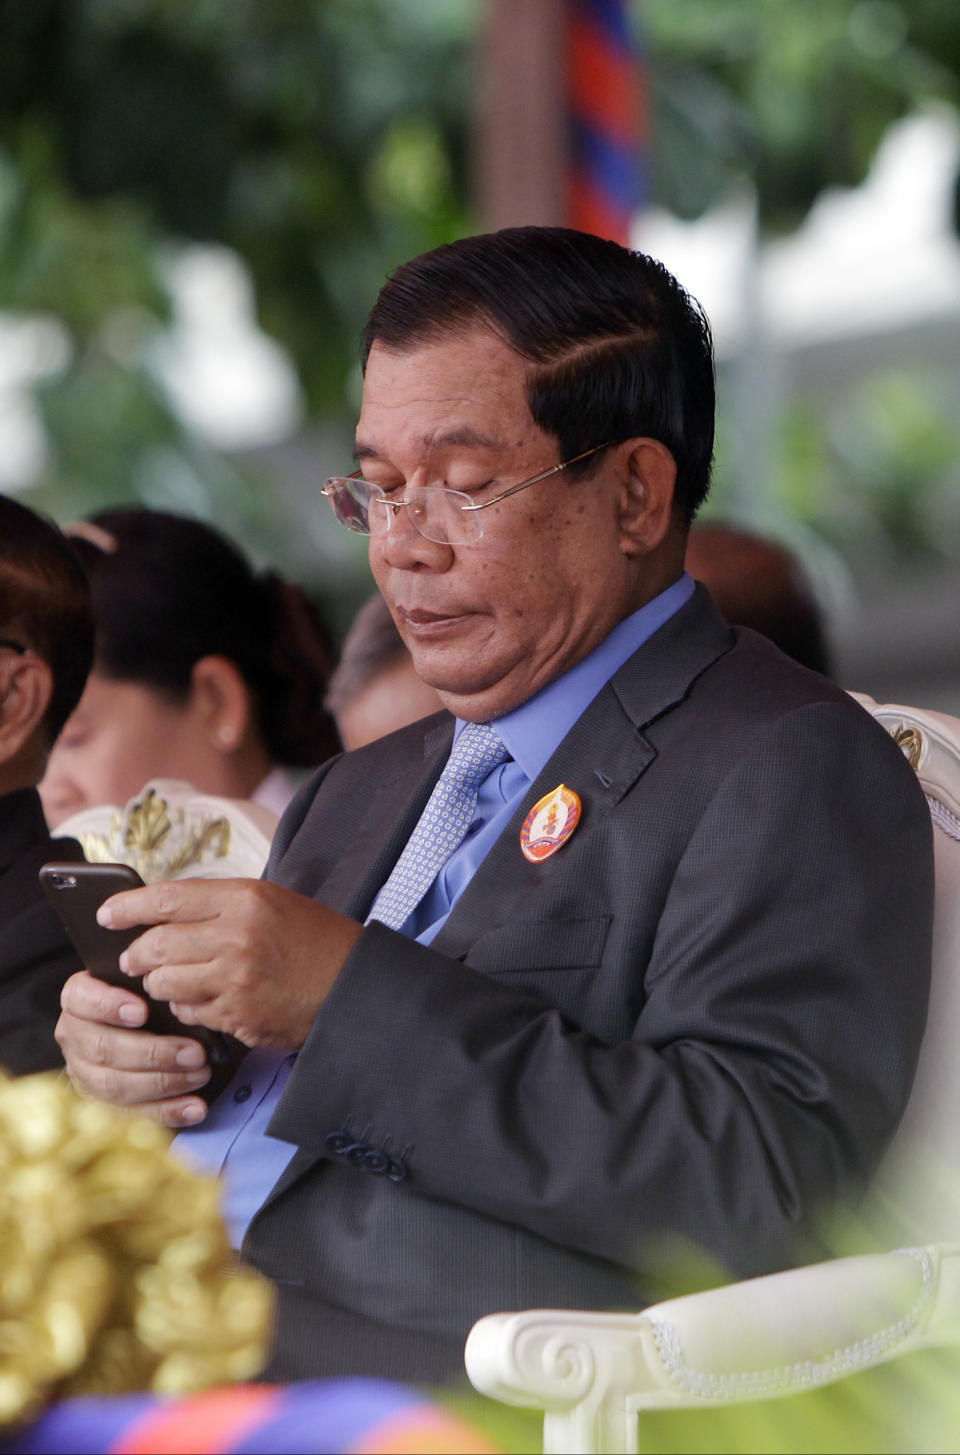 FILE - Cambodia's Prime Minister Hun Sen holds a mobile device during the celebrations of the 65th anniversary of the ruling Cambodian People 's Party in Phnom Penh, Cambodia, Tuesday, June 28, 2016. Cambodia’s Prime Minister Hun Sen, a devoted and very active user of Facebook, says he will no longer upload to the platform, and instead depend on the Telegram app for getting his message across. (AP Photo/Heng Sinith, File)